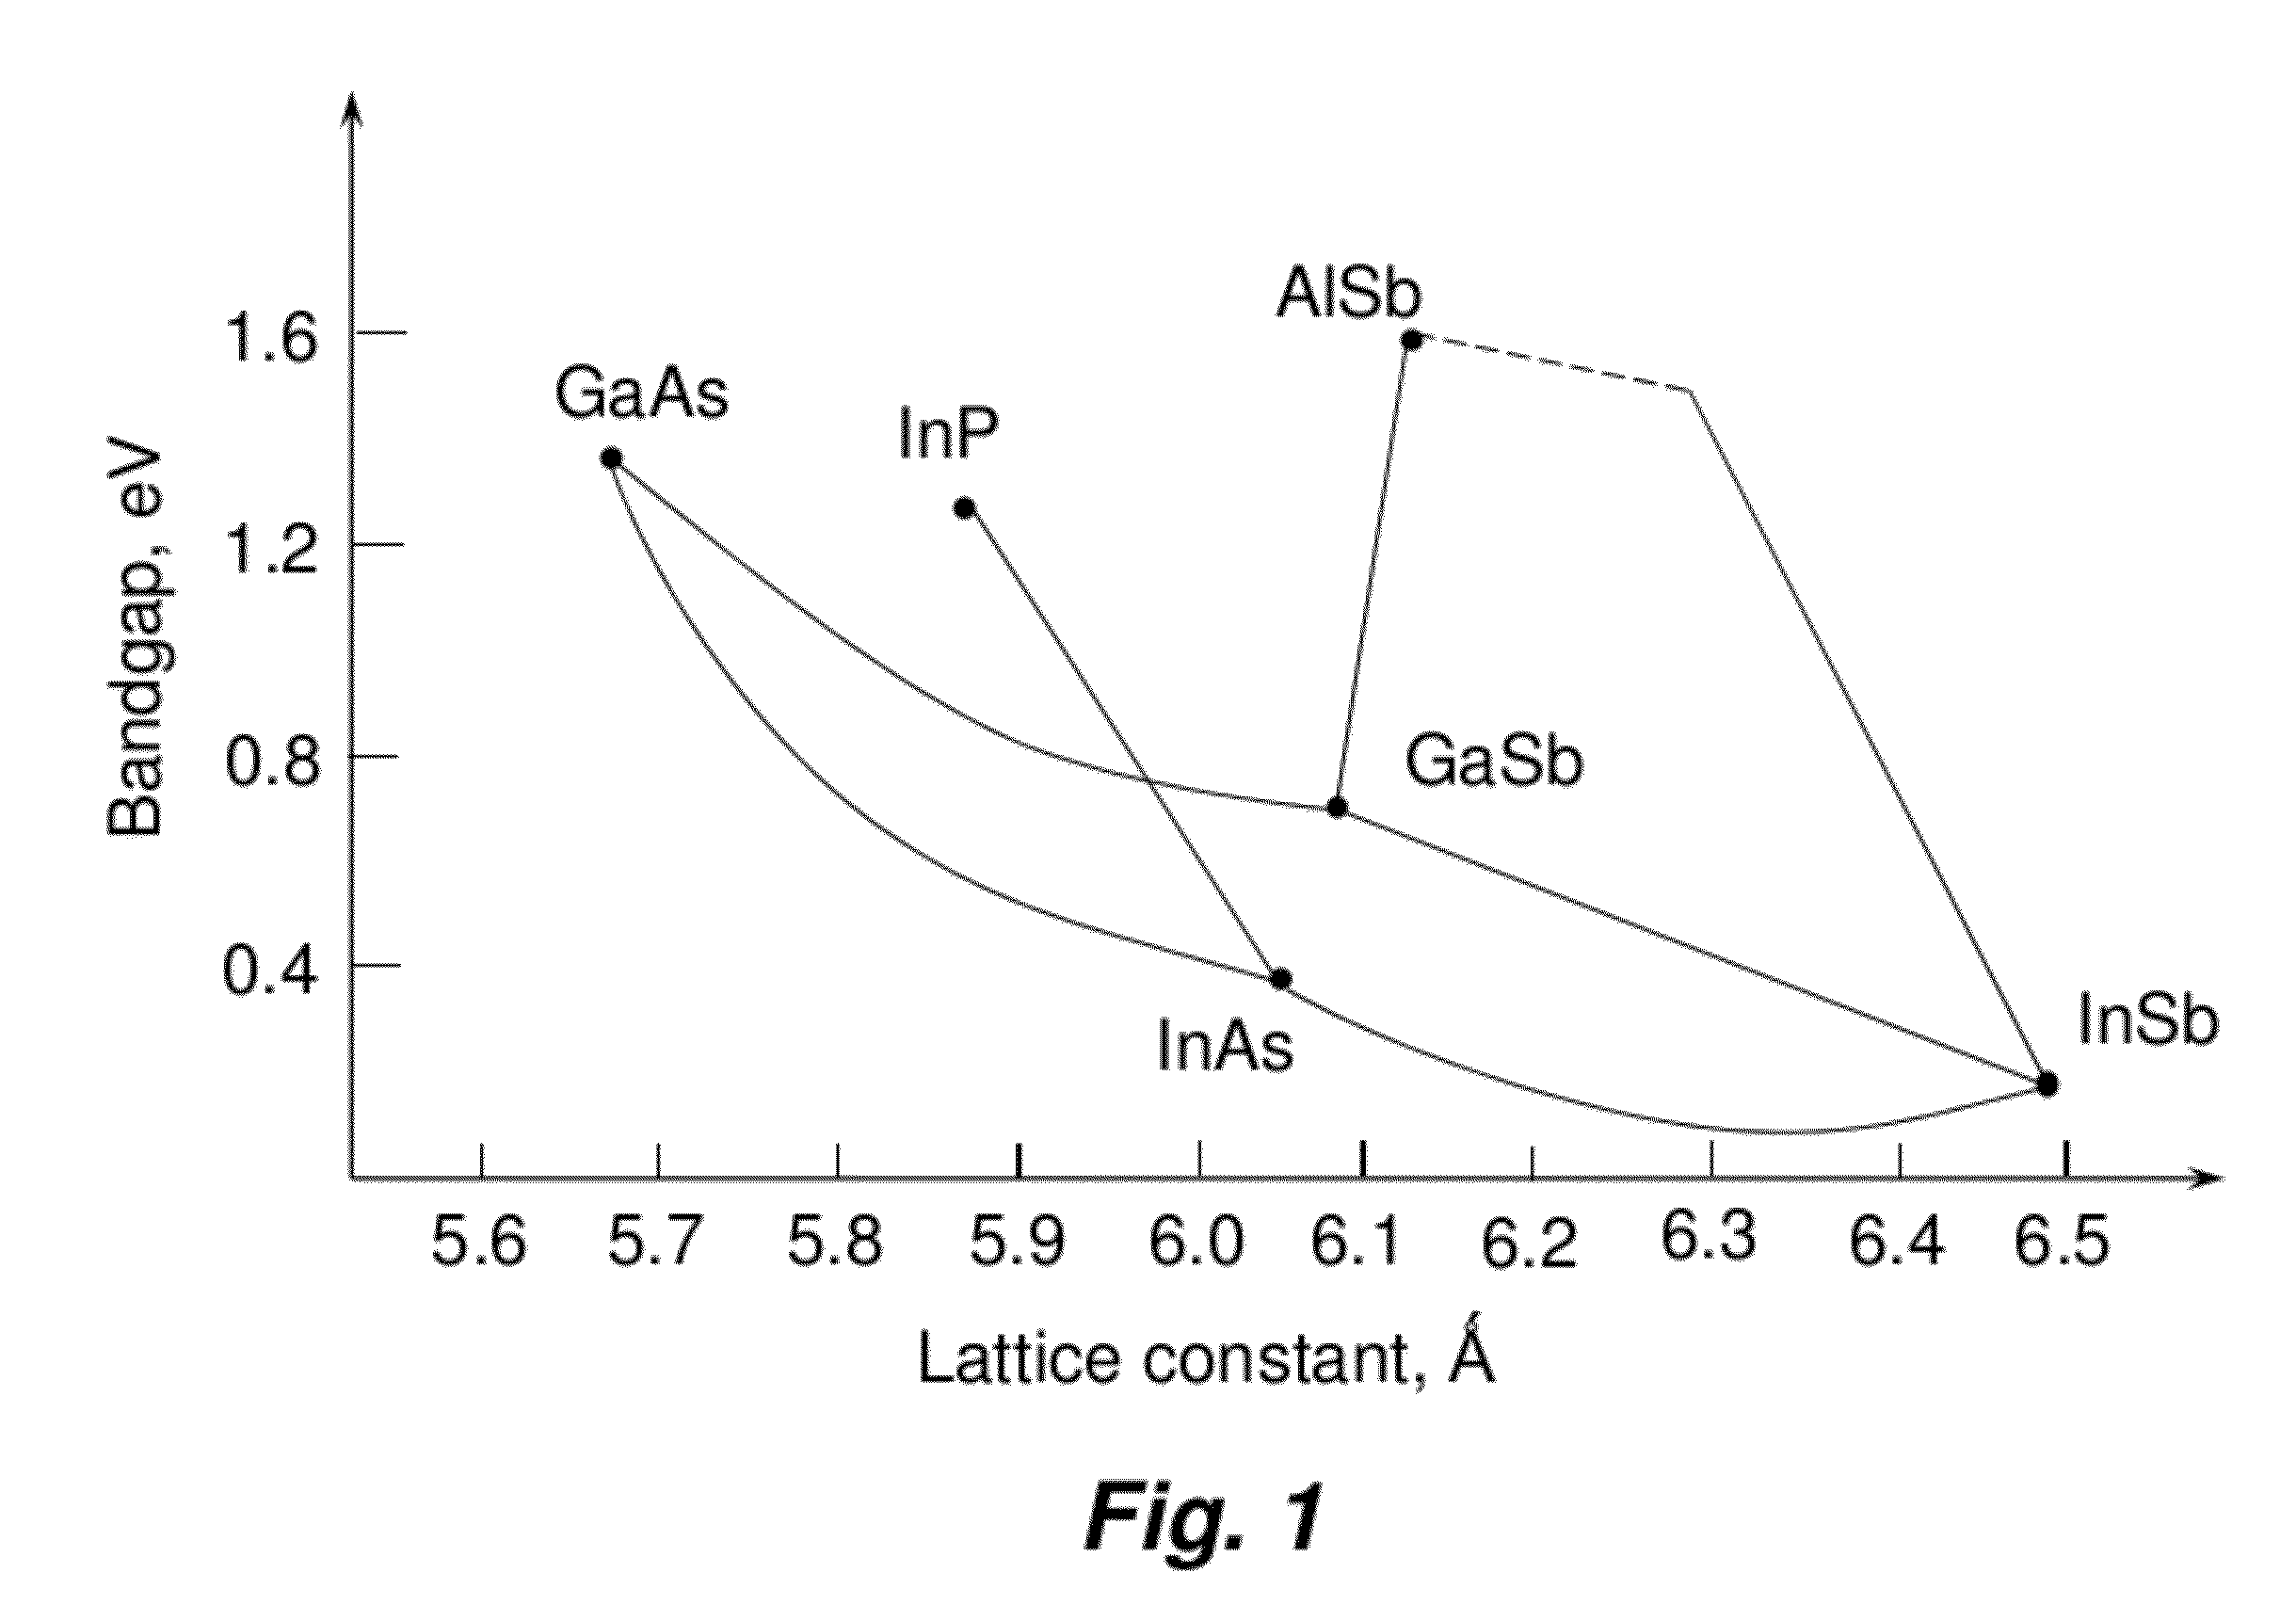 Compound Semiconductor Device on Virtual Substrate